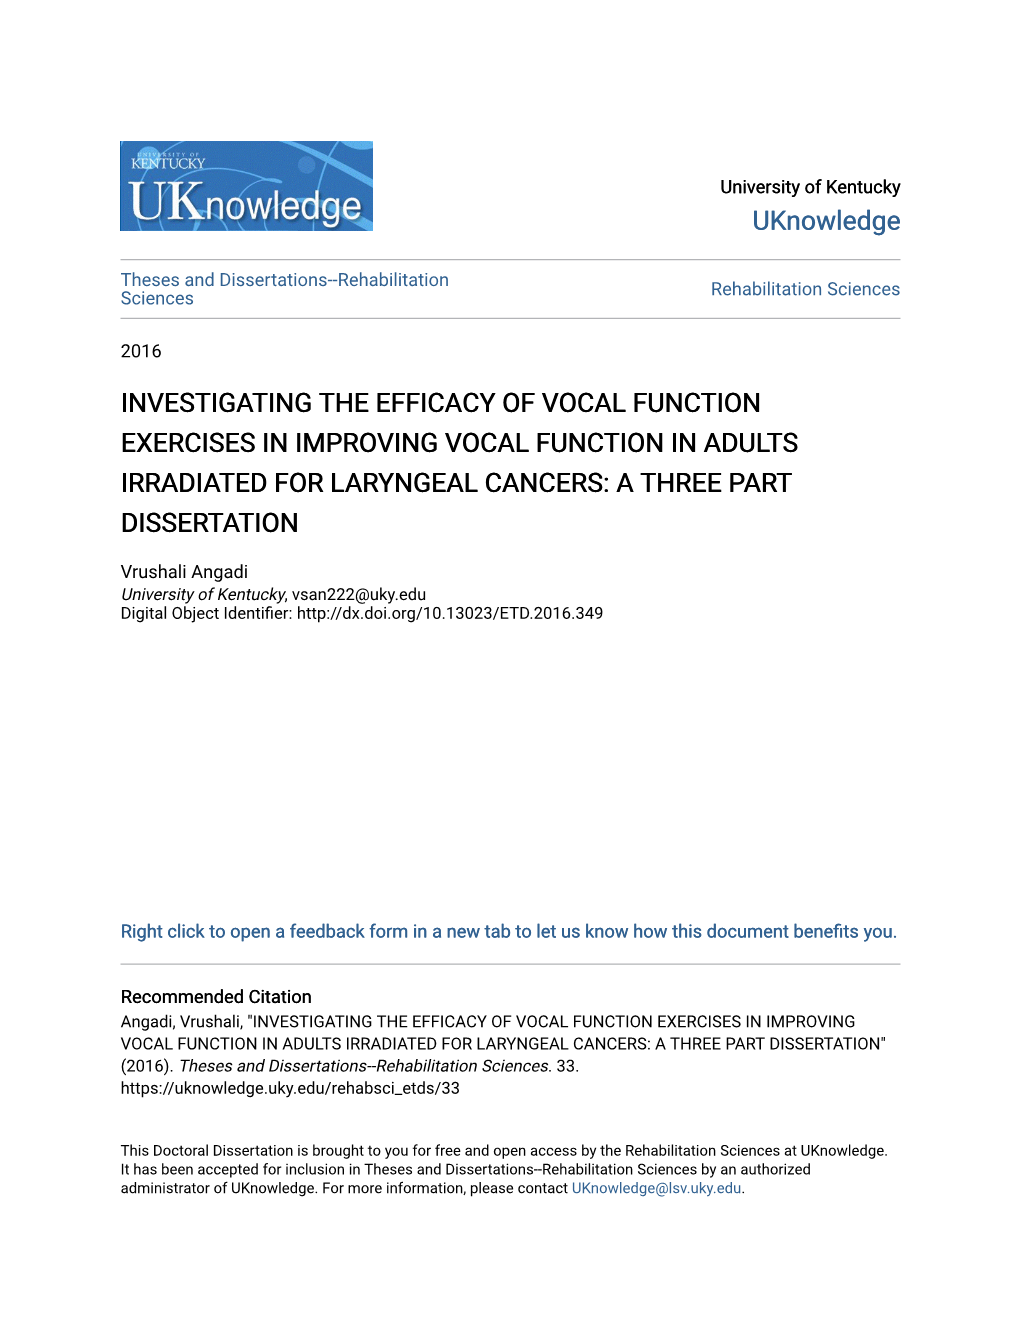 Investigating the Efficacy of Vocal Function Exercises in Improving Vocal Function in Adults Irradiated for Laryngeal Cancers: a Three Part Dissertation